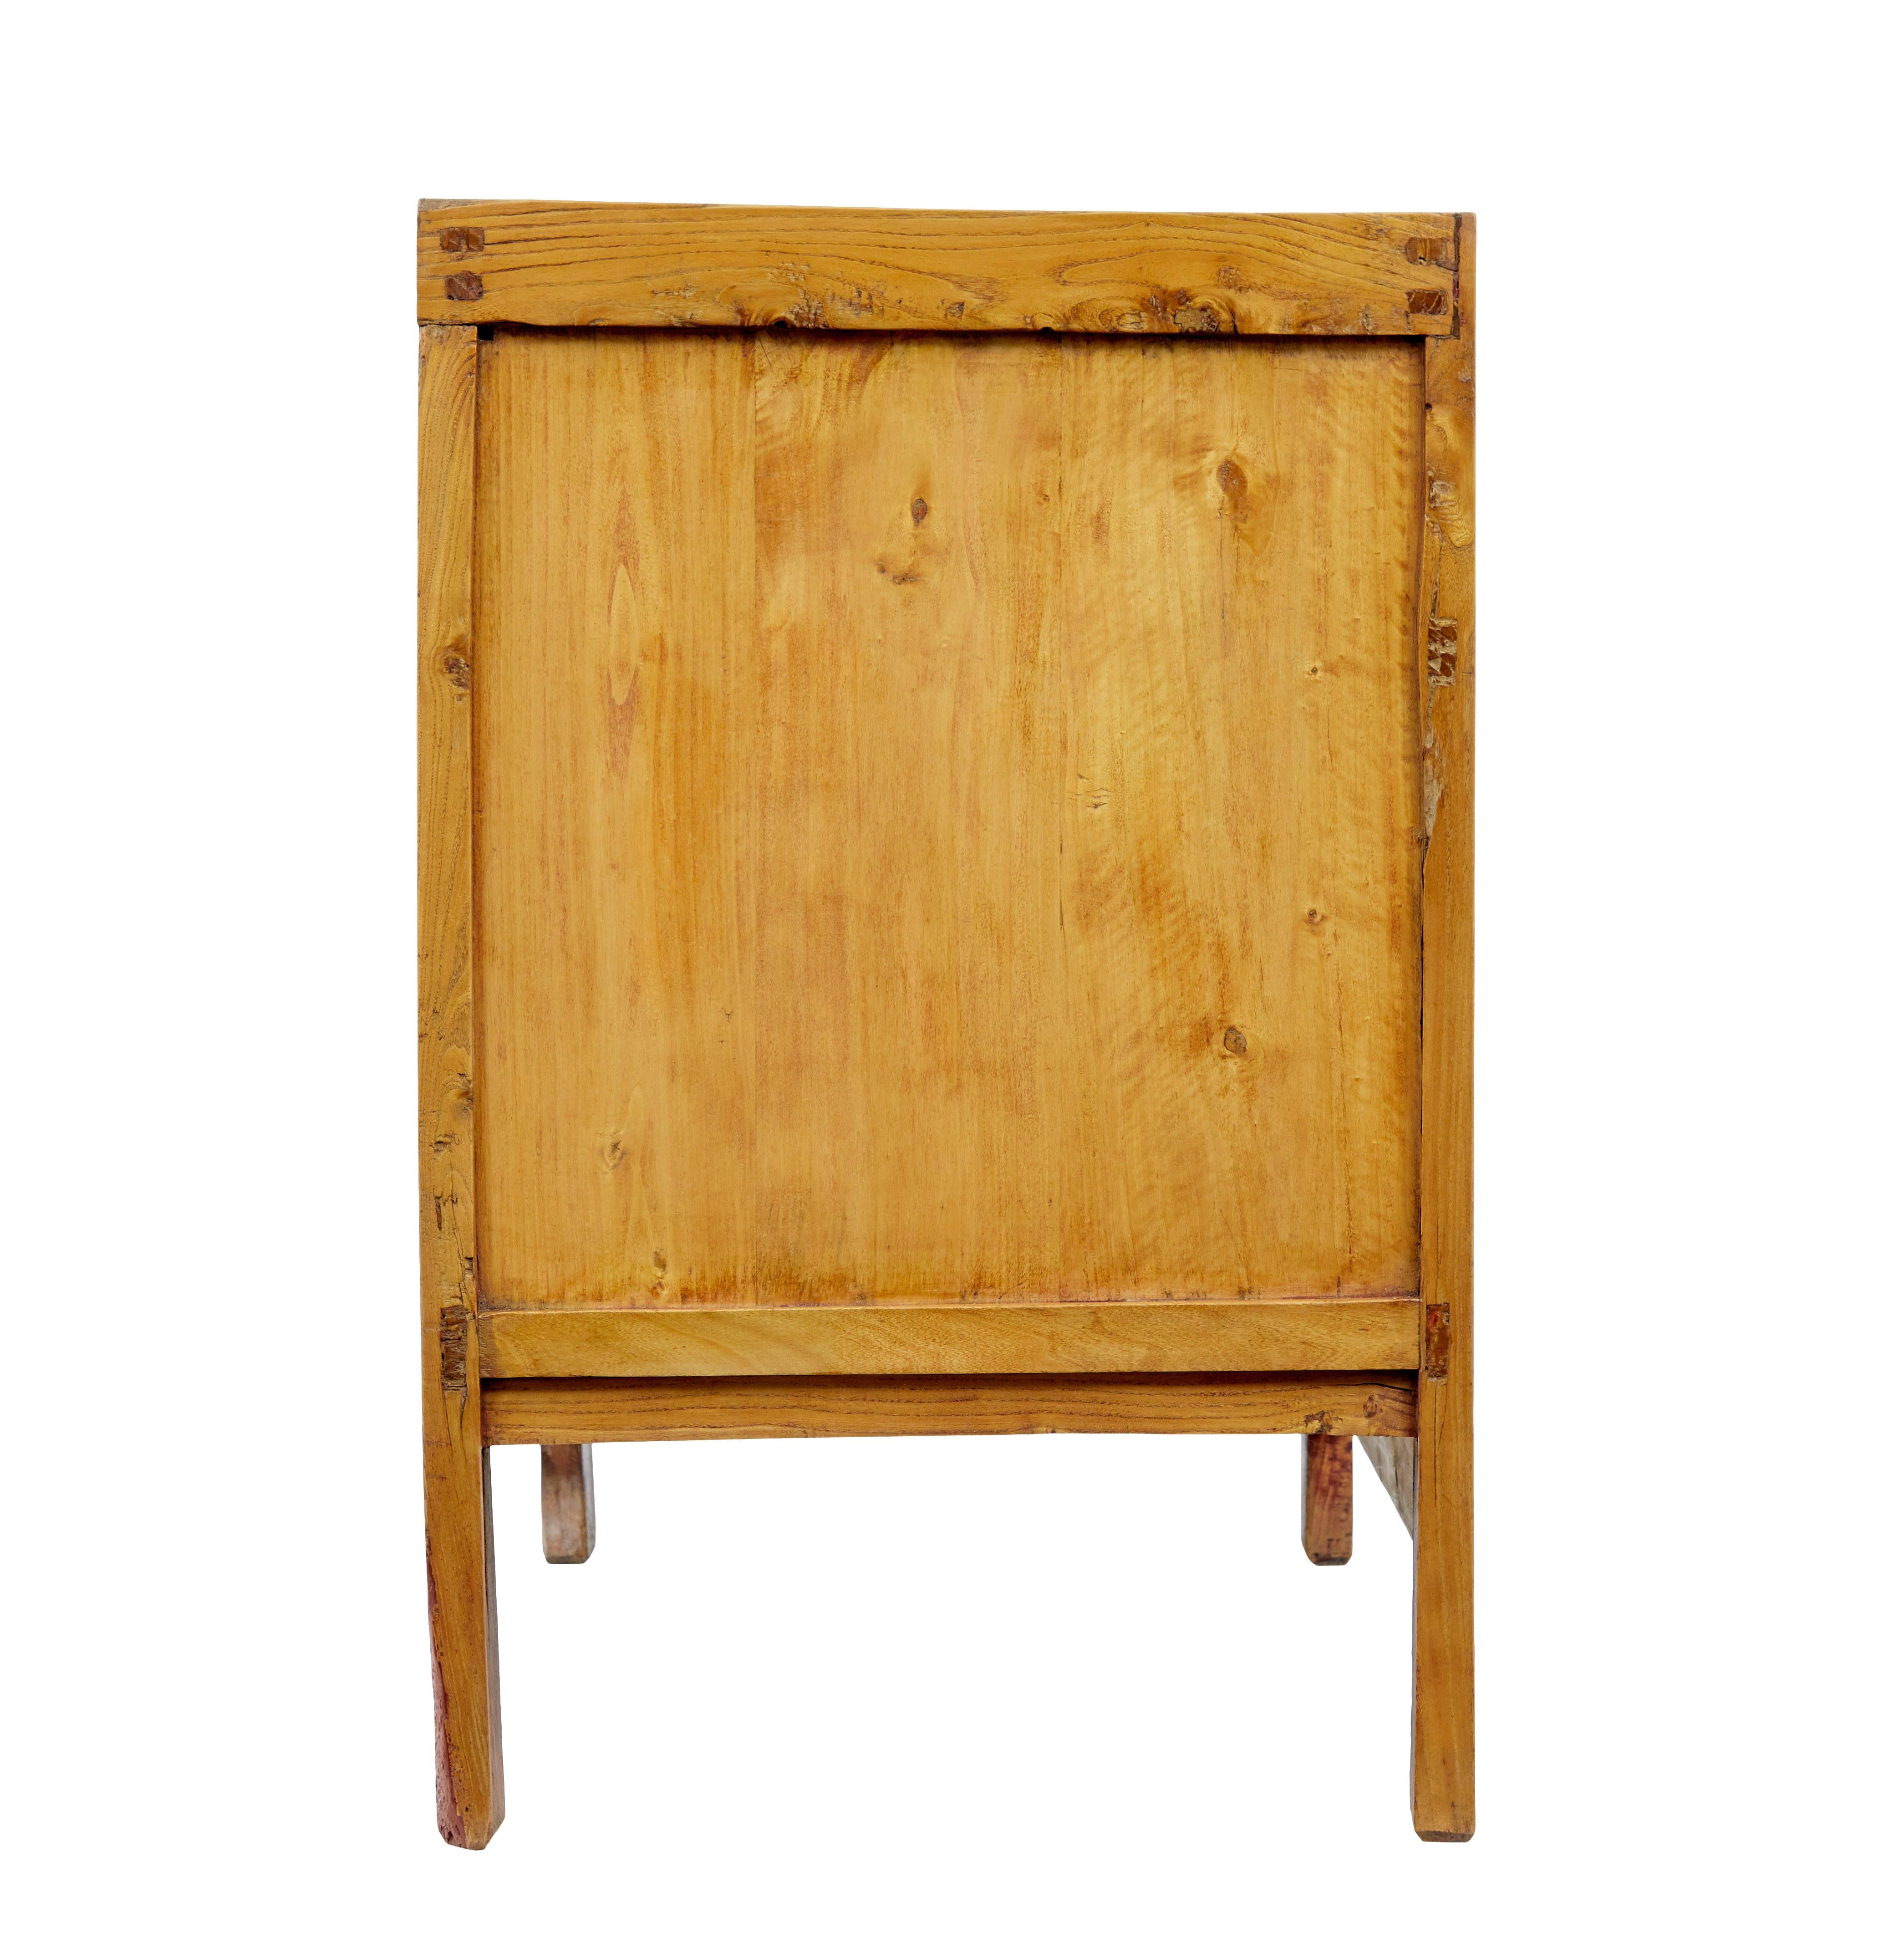 Late 19th century Chinese small sideboard For Sale 2